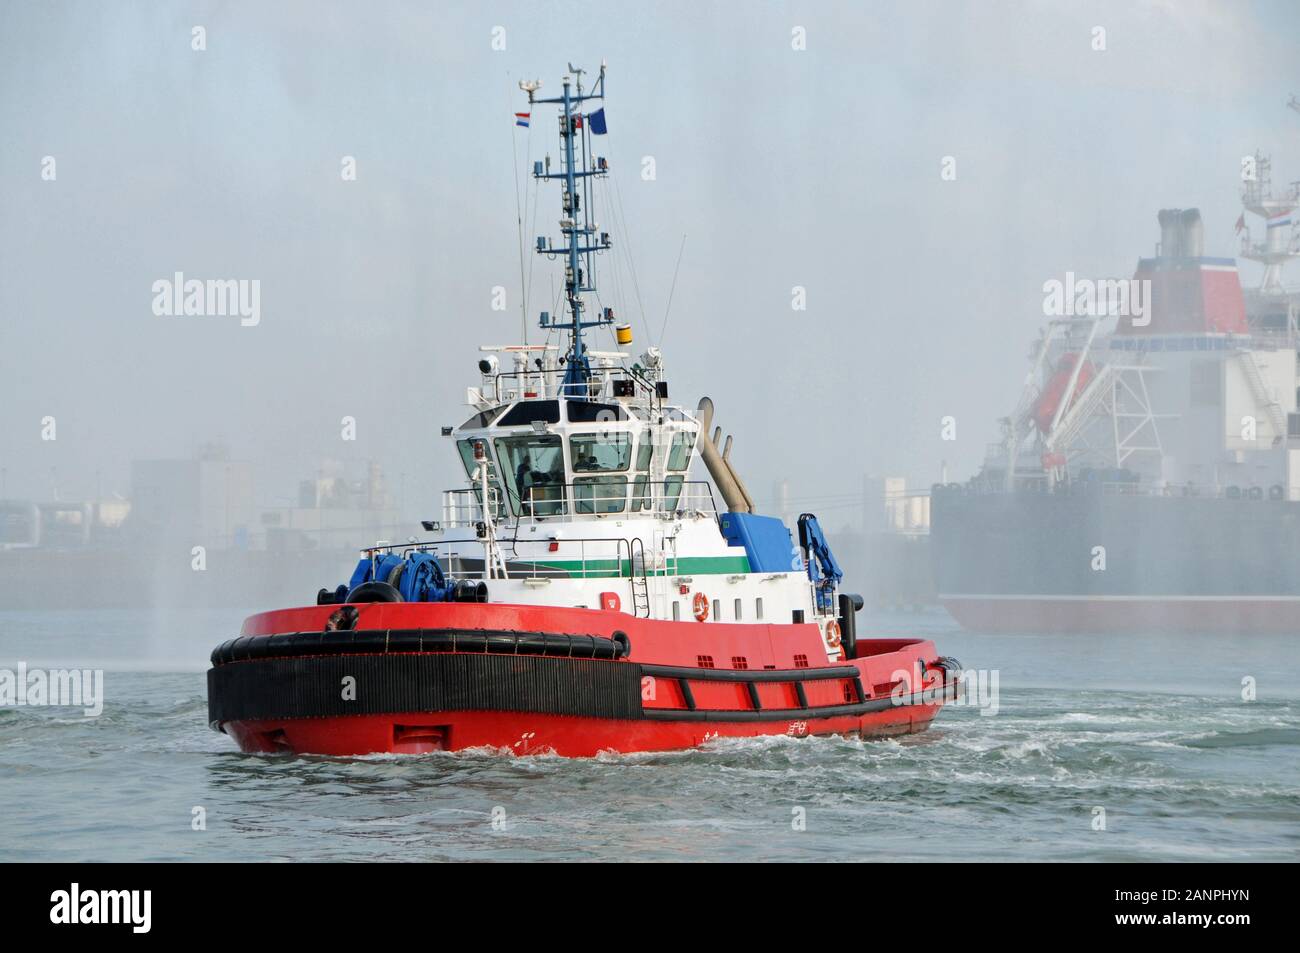 A tug on its way to an oiltanker in a foggy port of Rotterdam Stock Photo